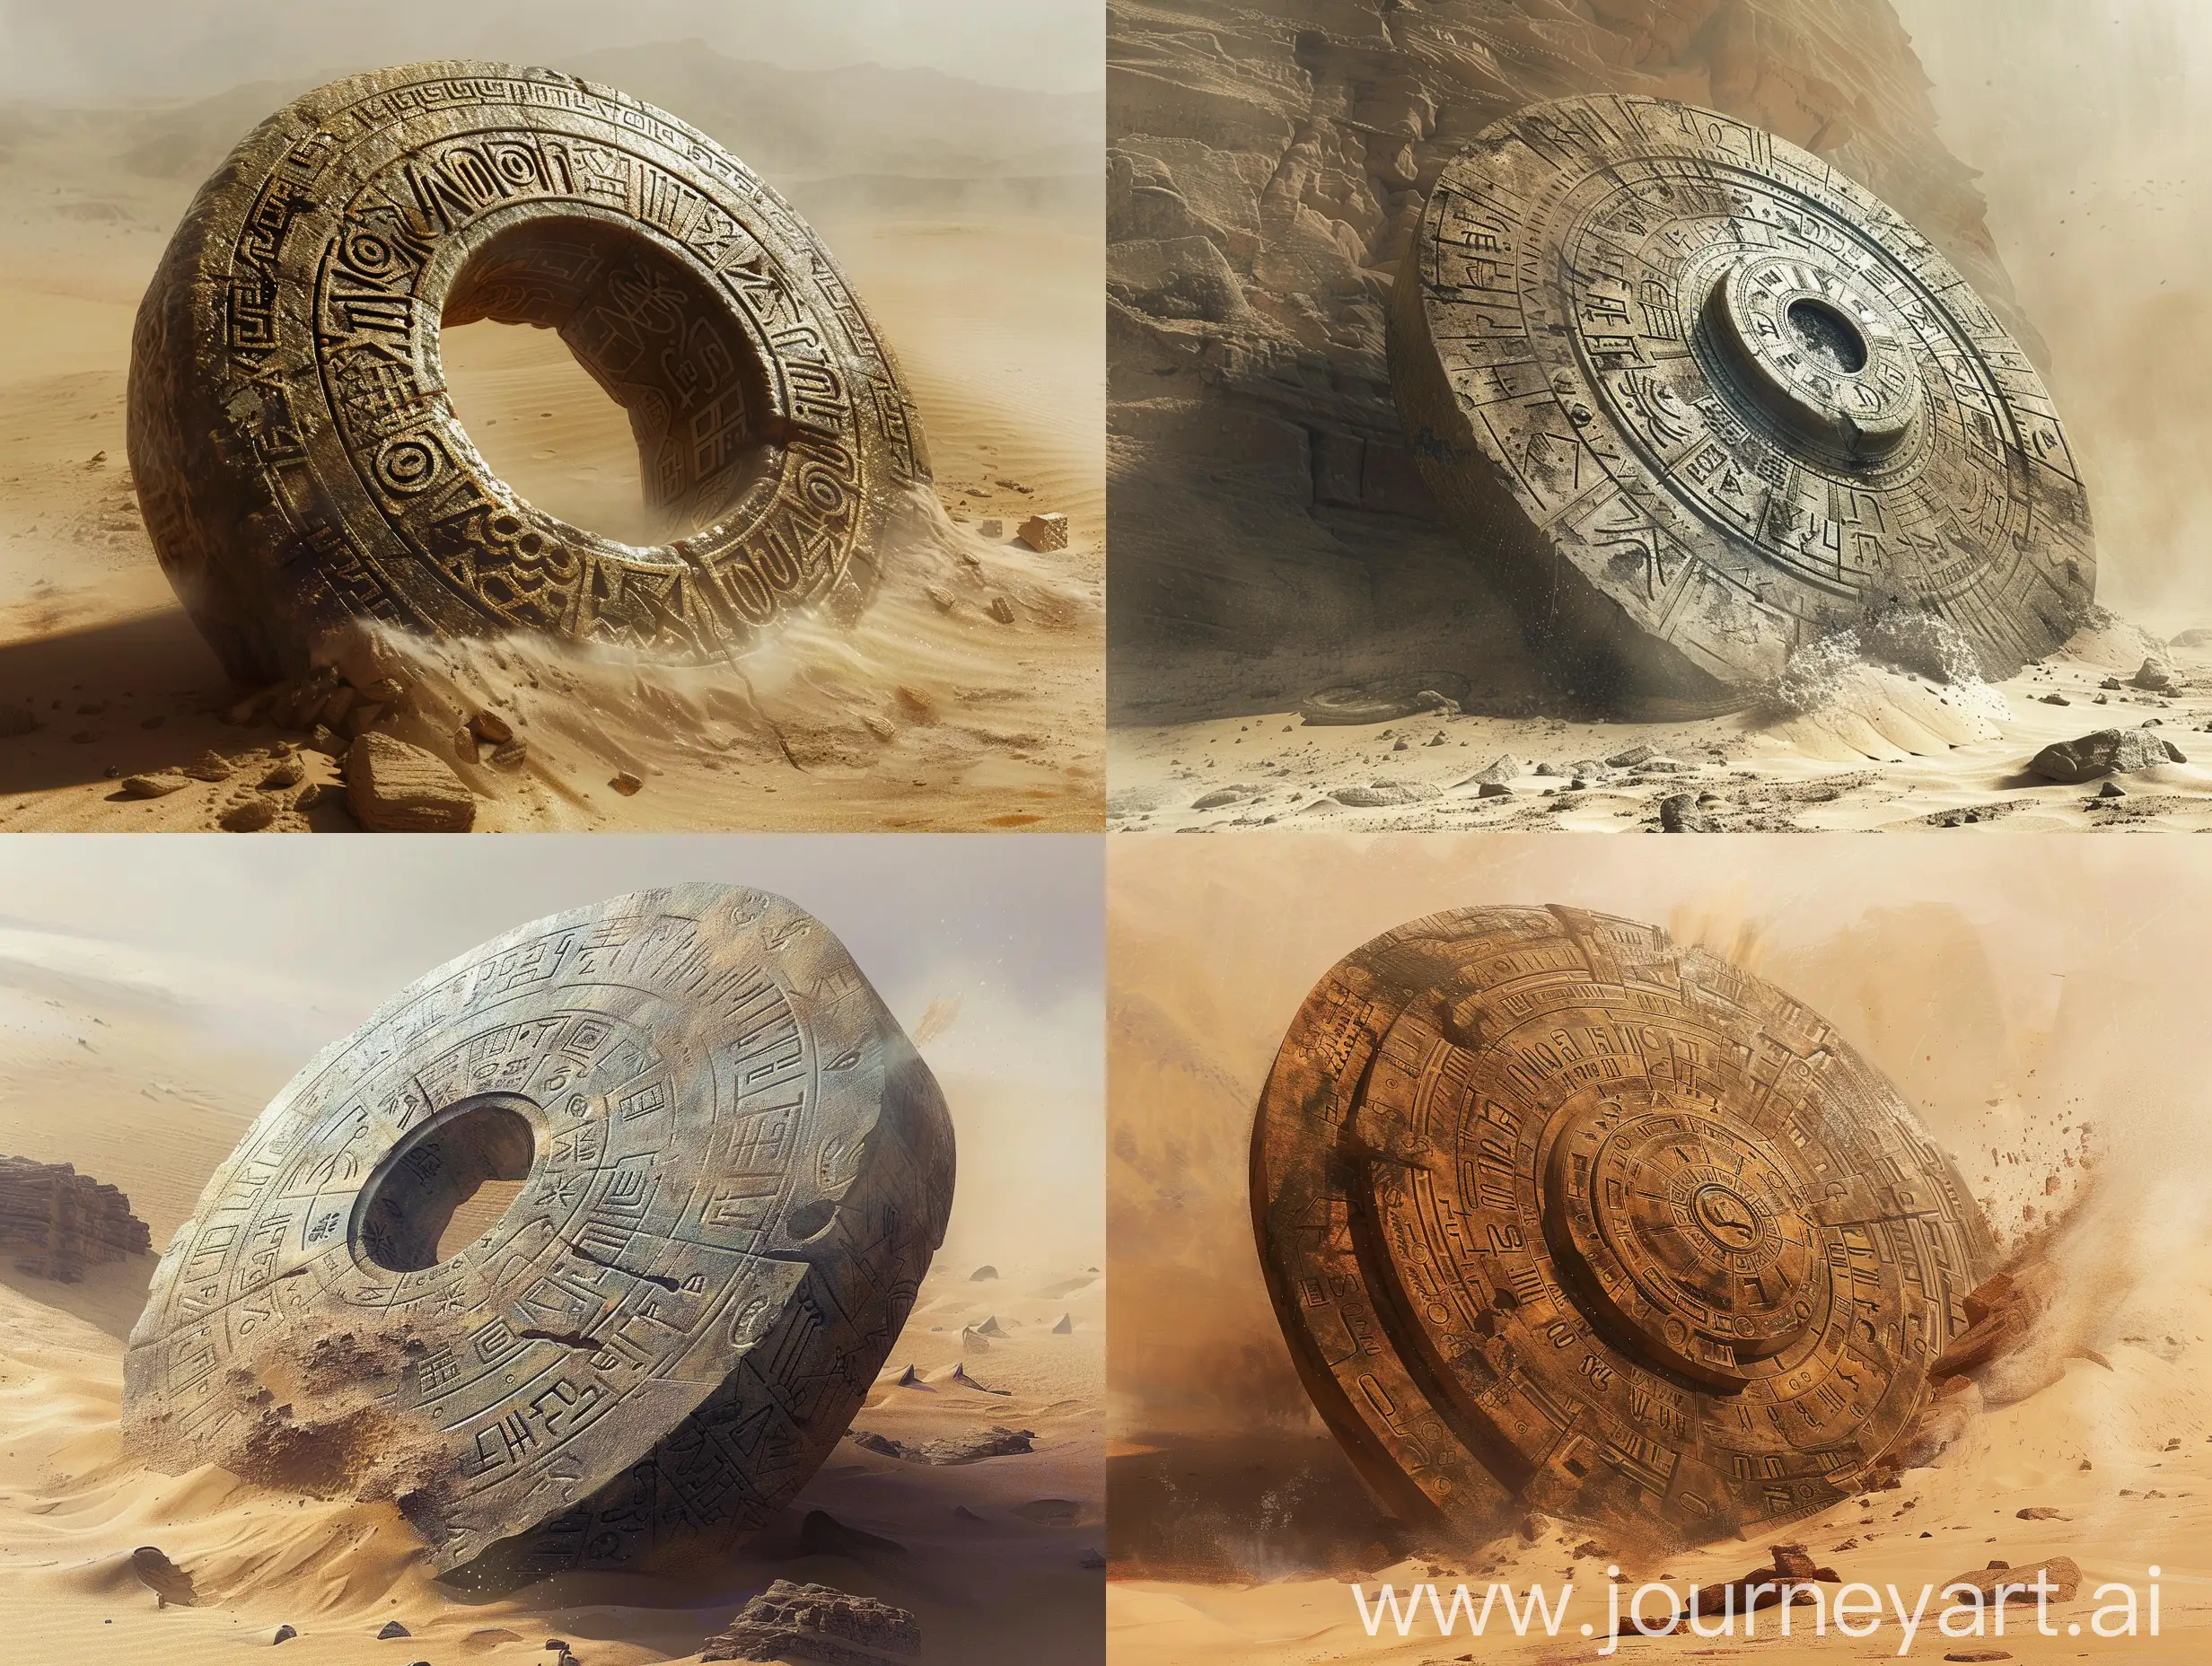 create an image in the style of artist Zdzisław Beksiński. A large and ancient circular stone tool , with intricate patterns, dials and unknown letters, of mysterious origin, lying in a desert, half buried in sand. muted colours.